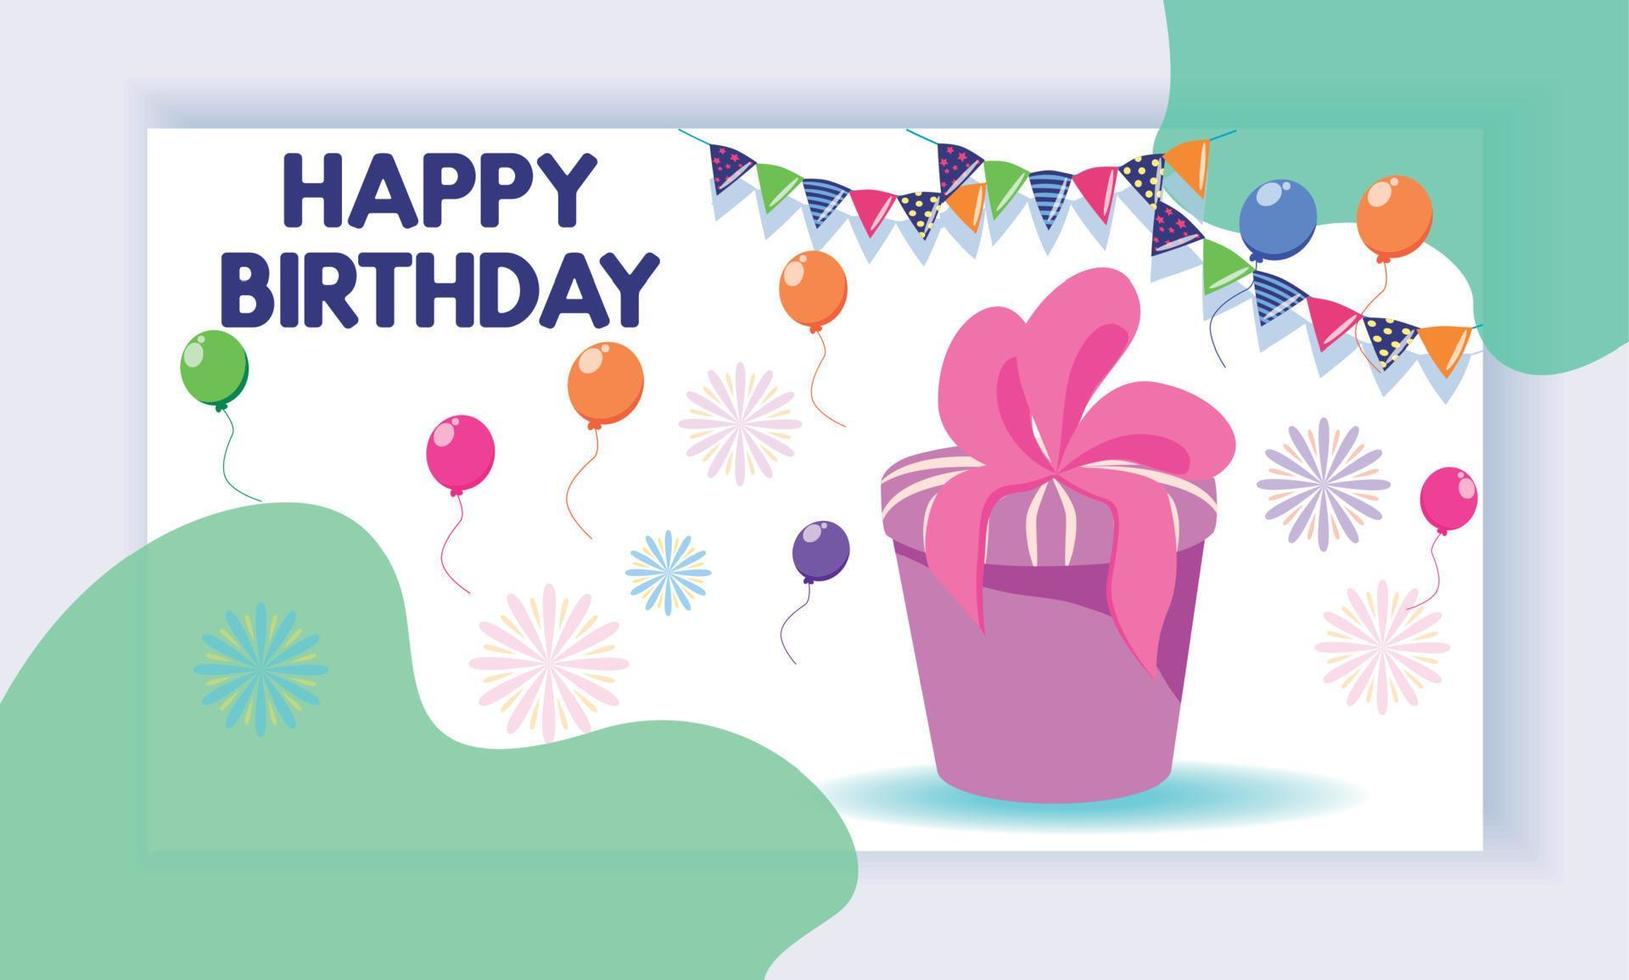 Concept of landing page with birthday celebrations theme. Birthday party celebration vector